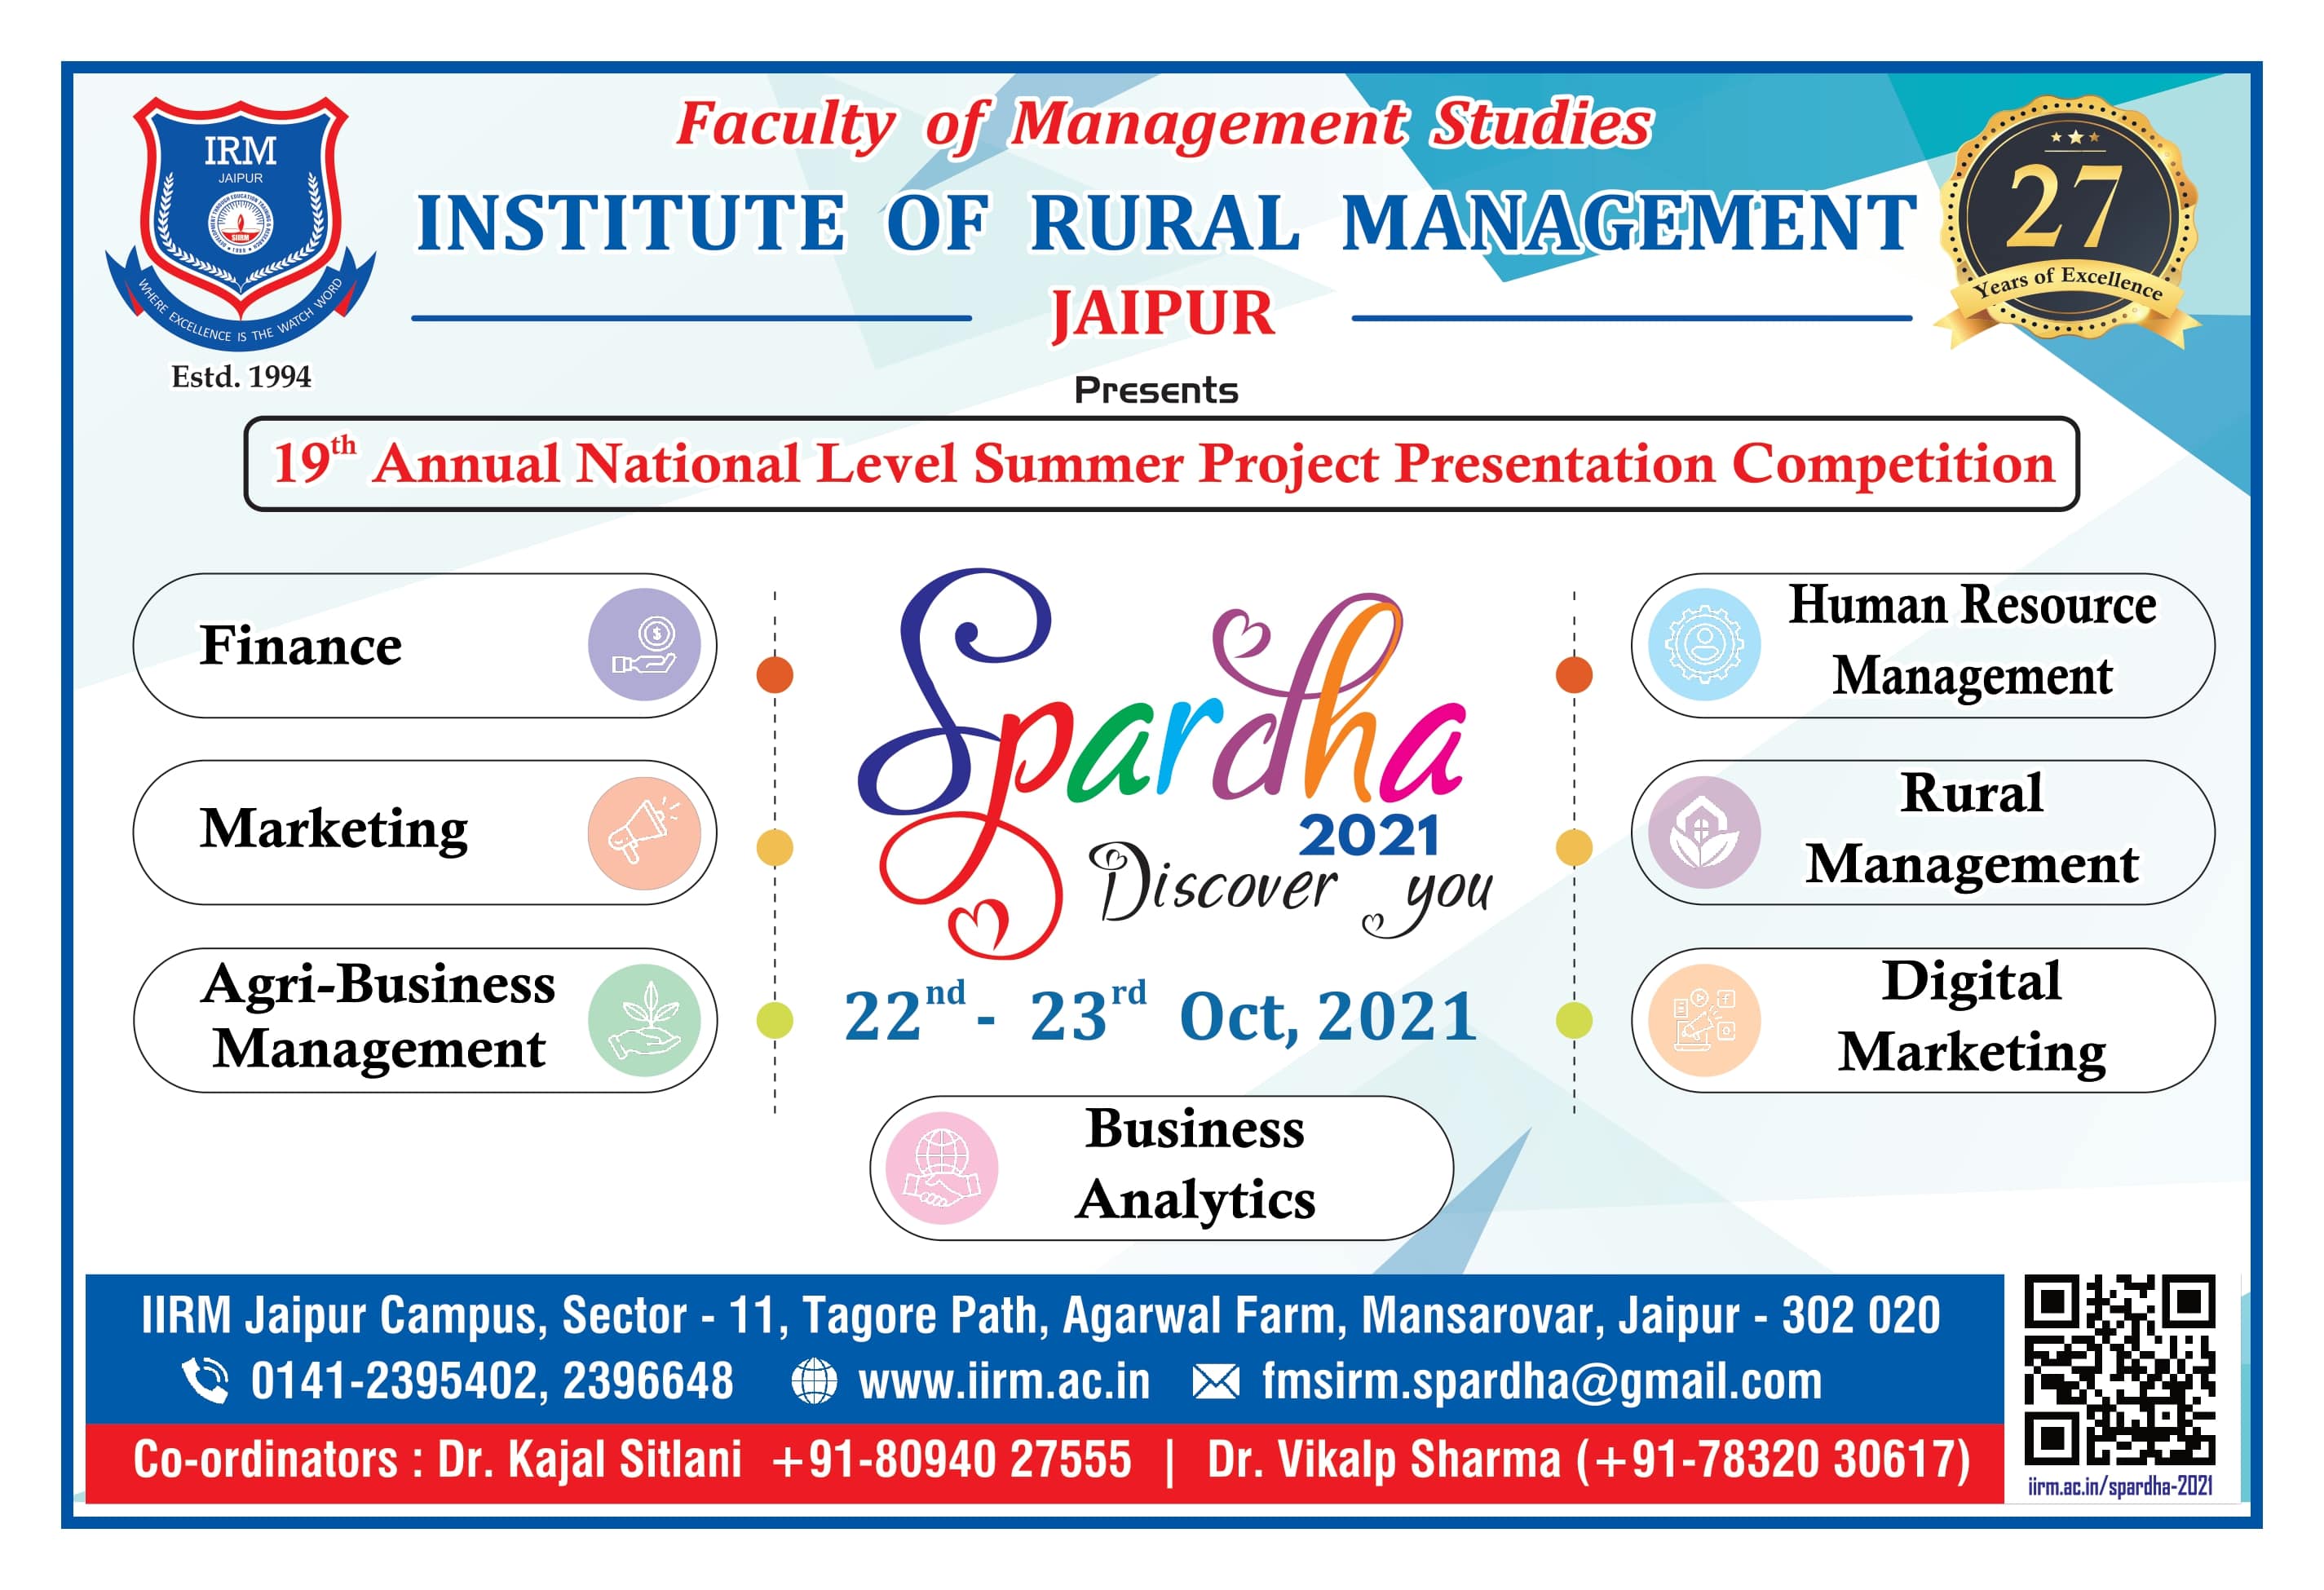 19th Annual National Summer Project Presentation Competition "SPARDHA" - top ranked mba colleges in jaipur Rajasthan india